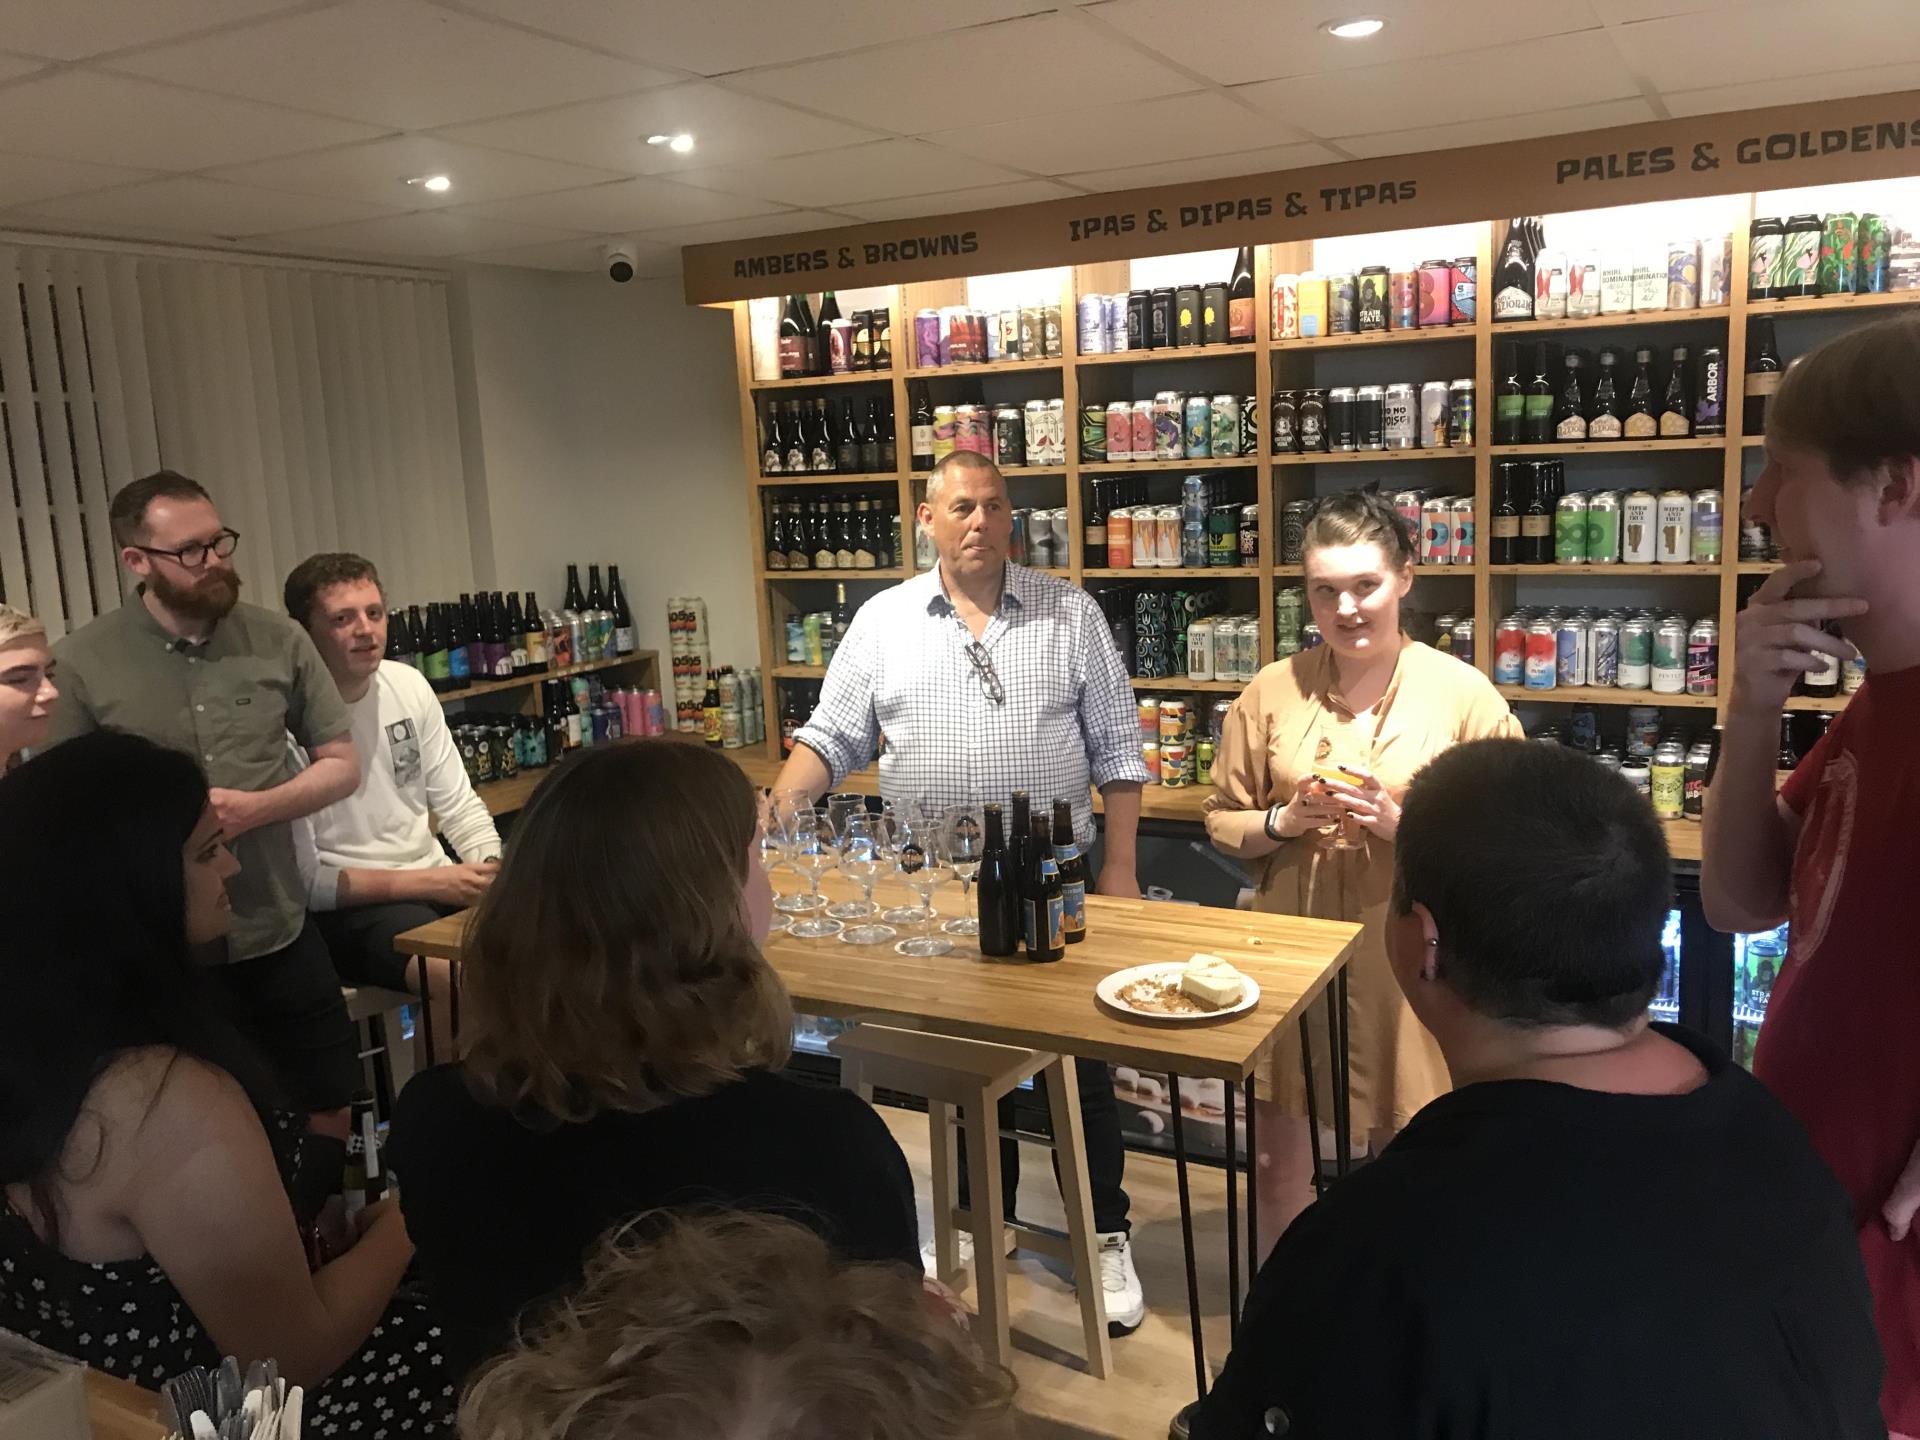 A regular series of tasting events